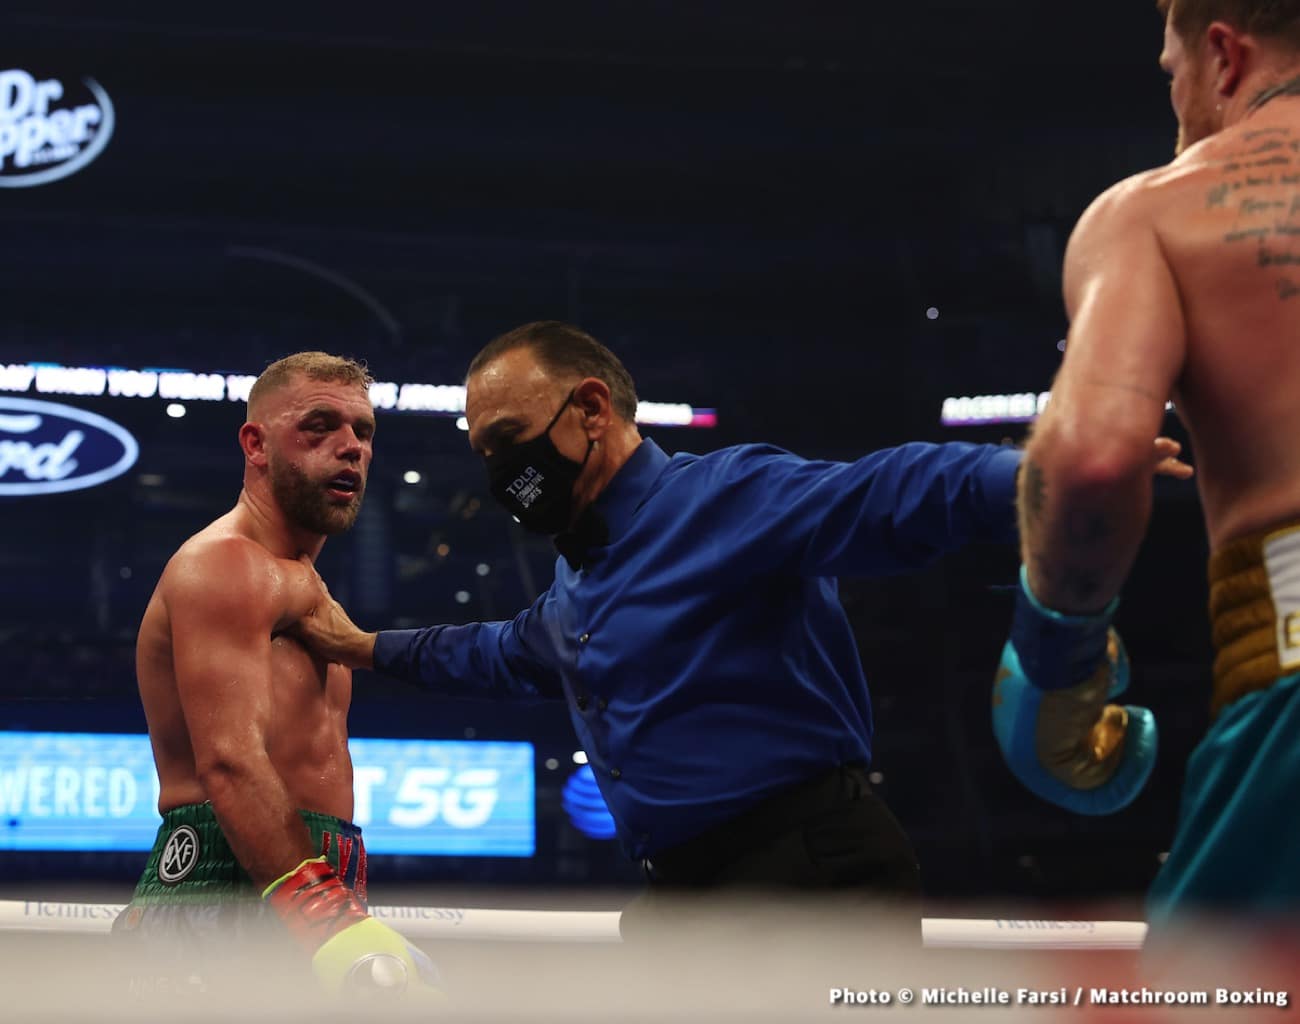 Image: Billy Joe Saunders considering retirement after loss to Canelo